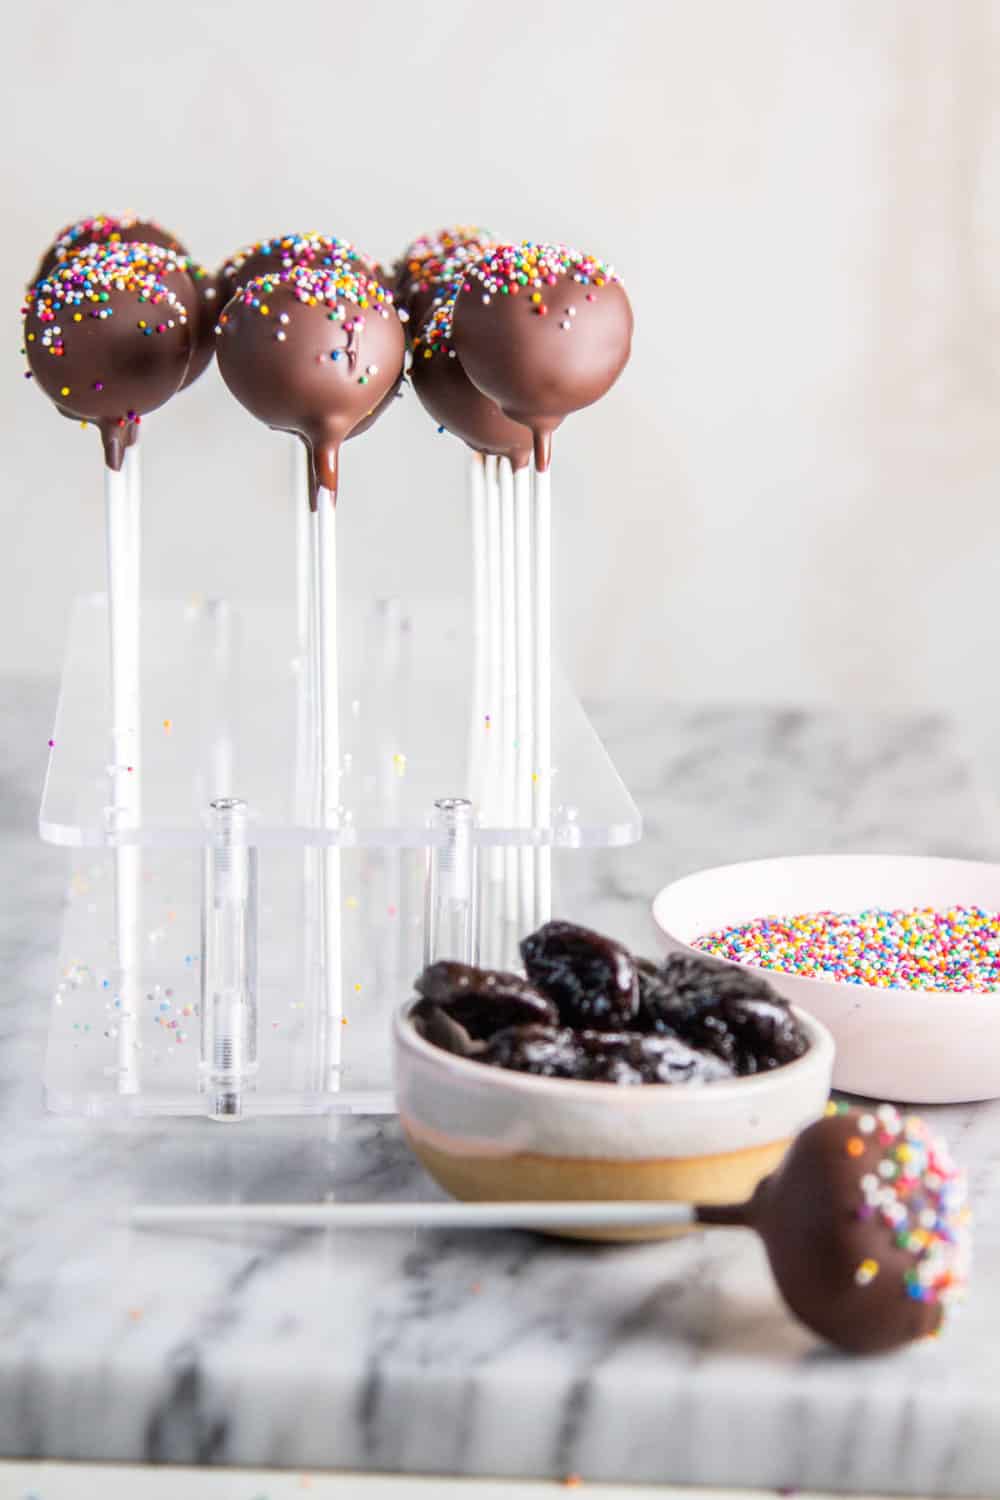 A bowl of prunes and a bowl of sprinkles on a marble slab next to a cake pop stand filled with sprinkle covered chocolate cake pops.